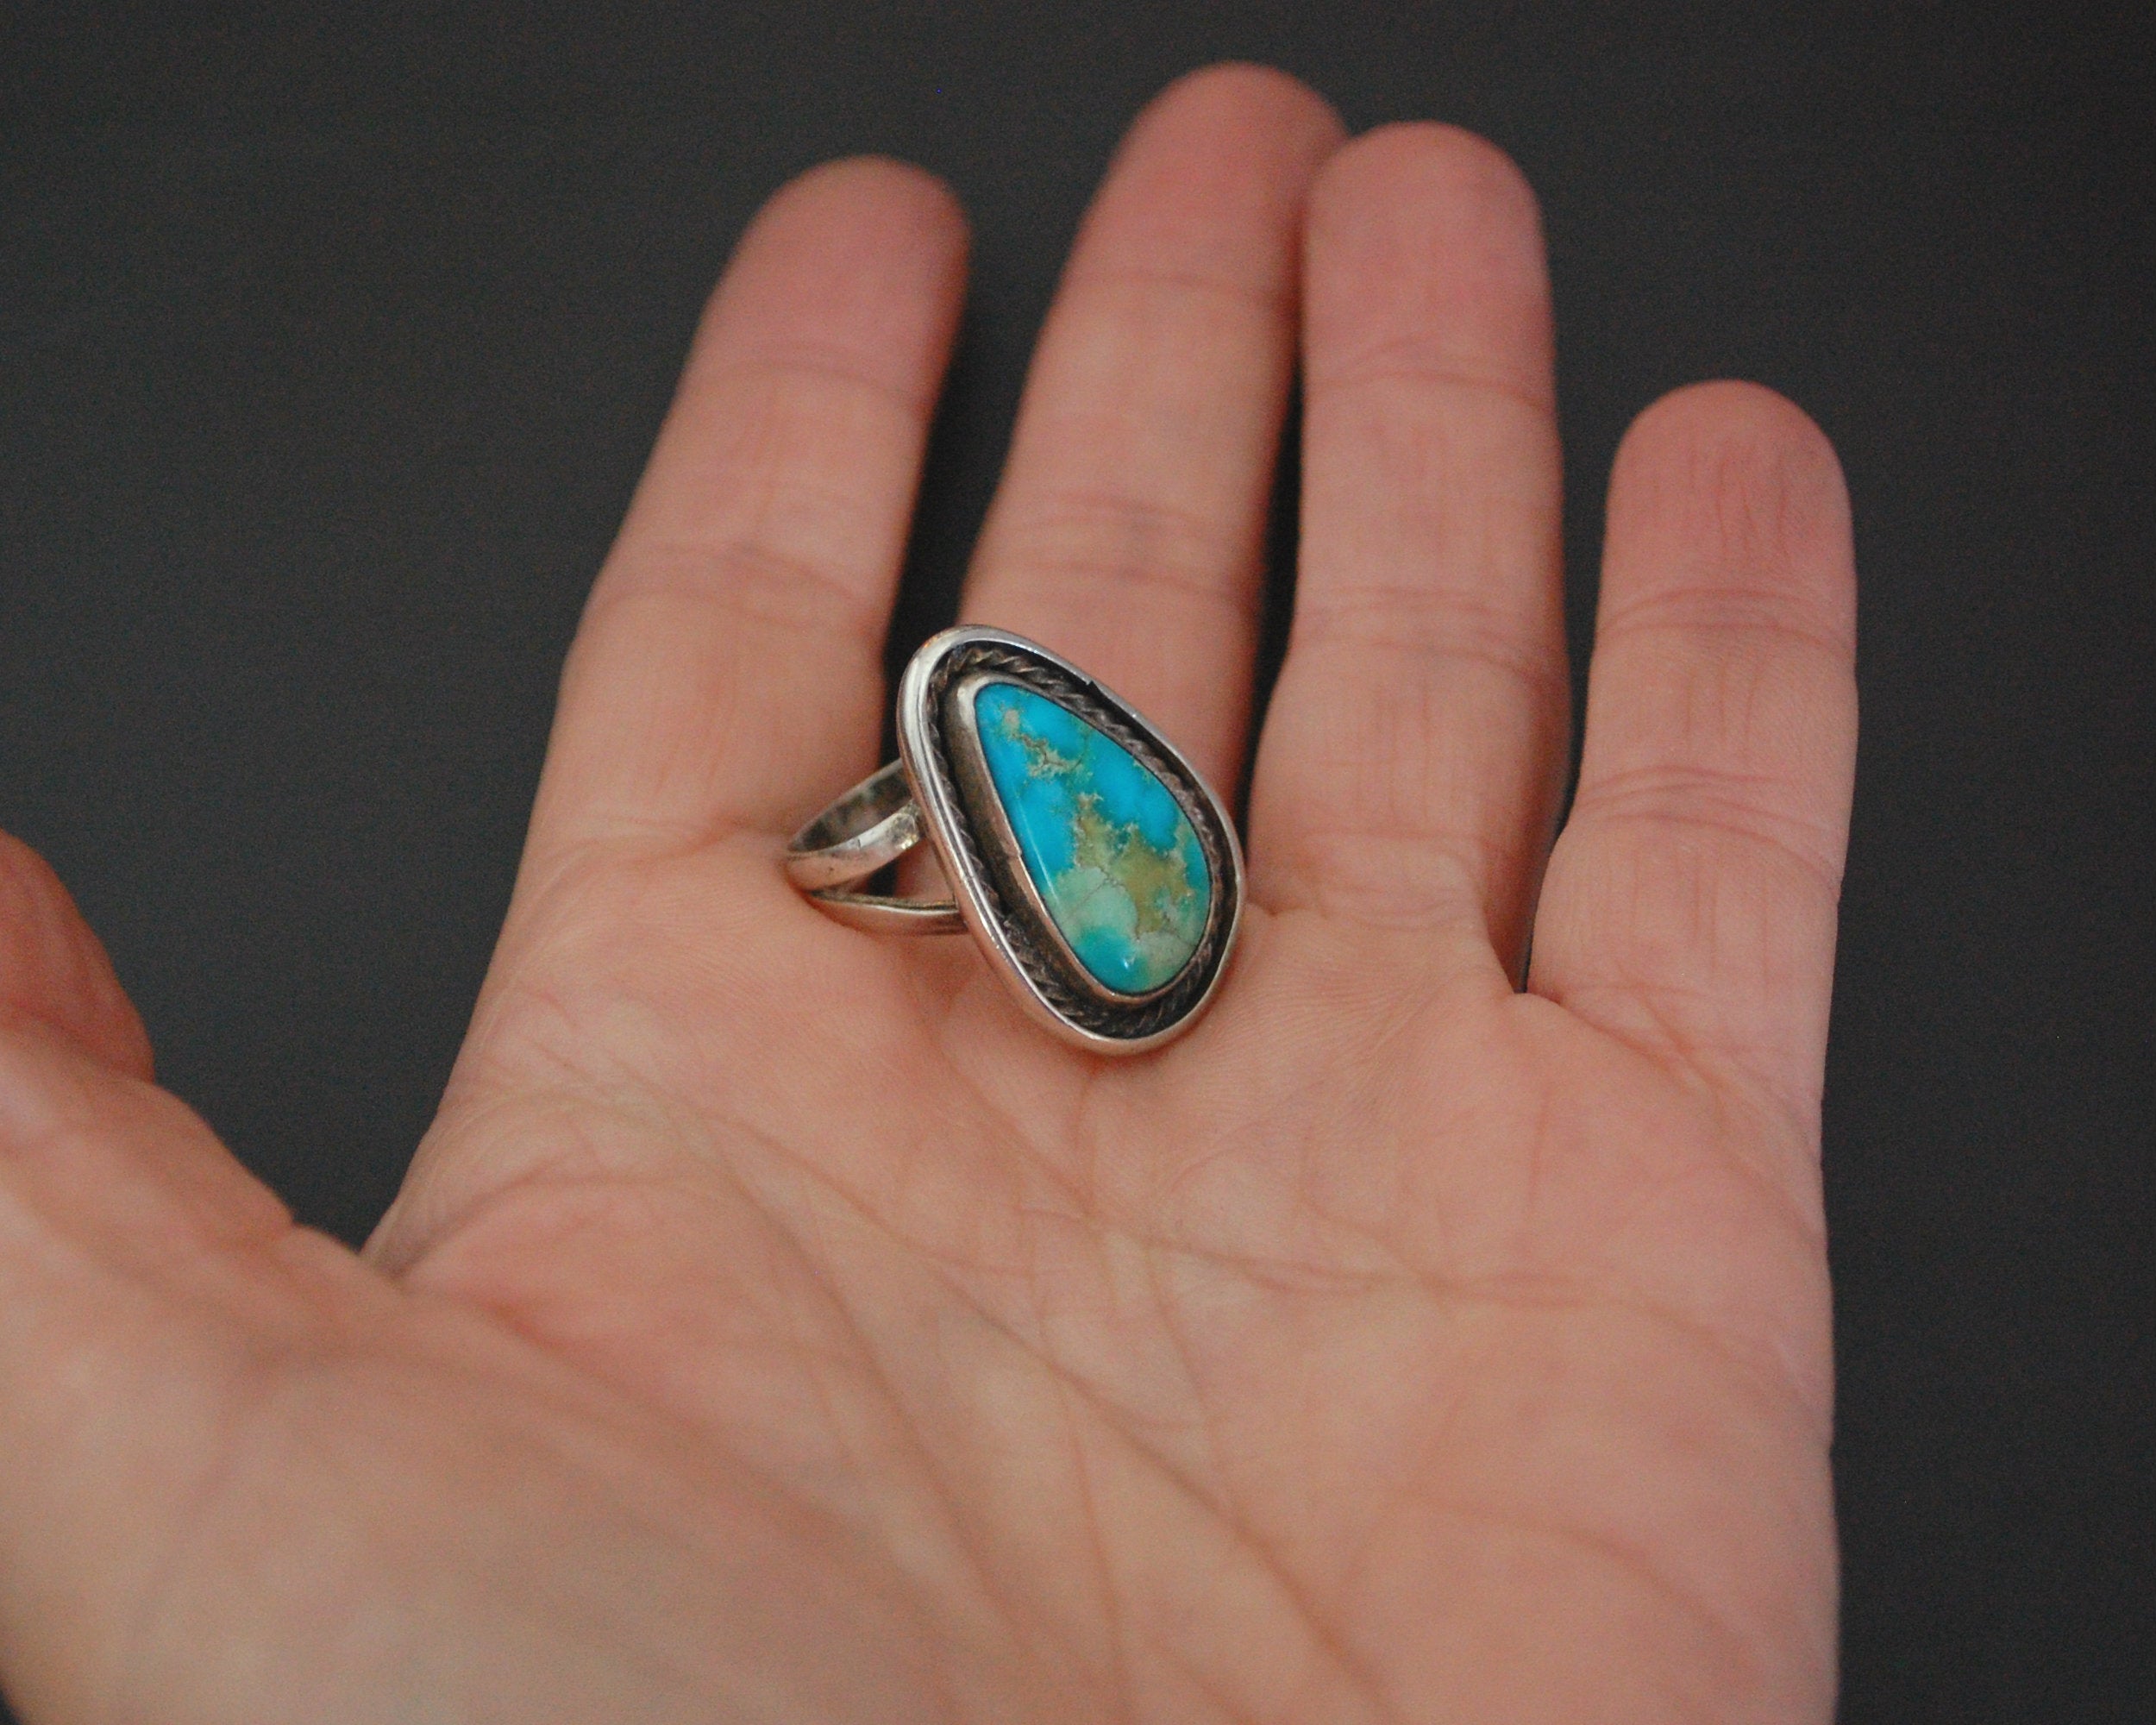 Native American Navajo Turquoise Ring - Size 6.25